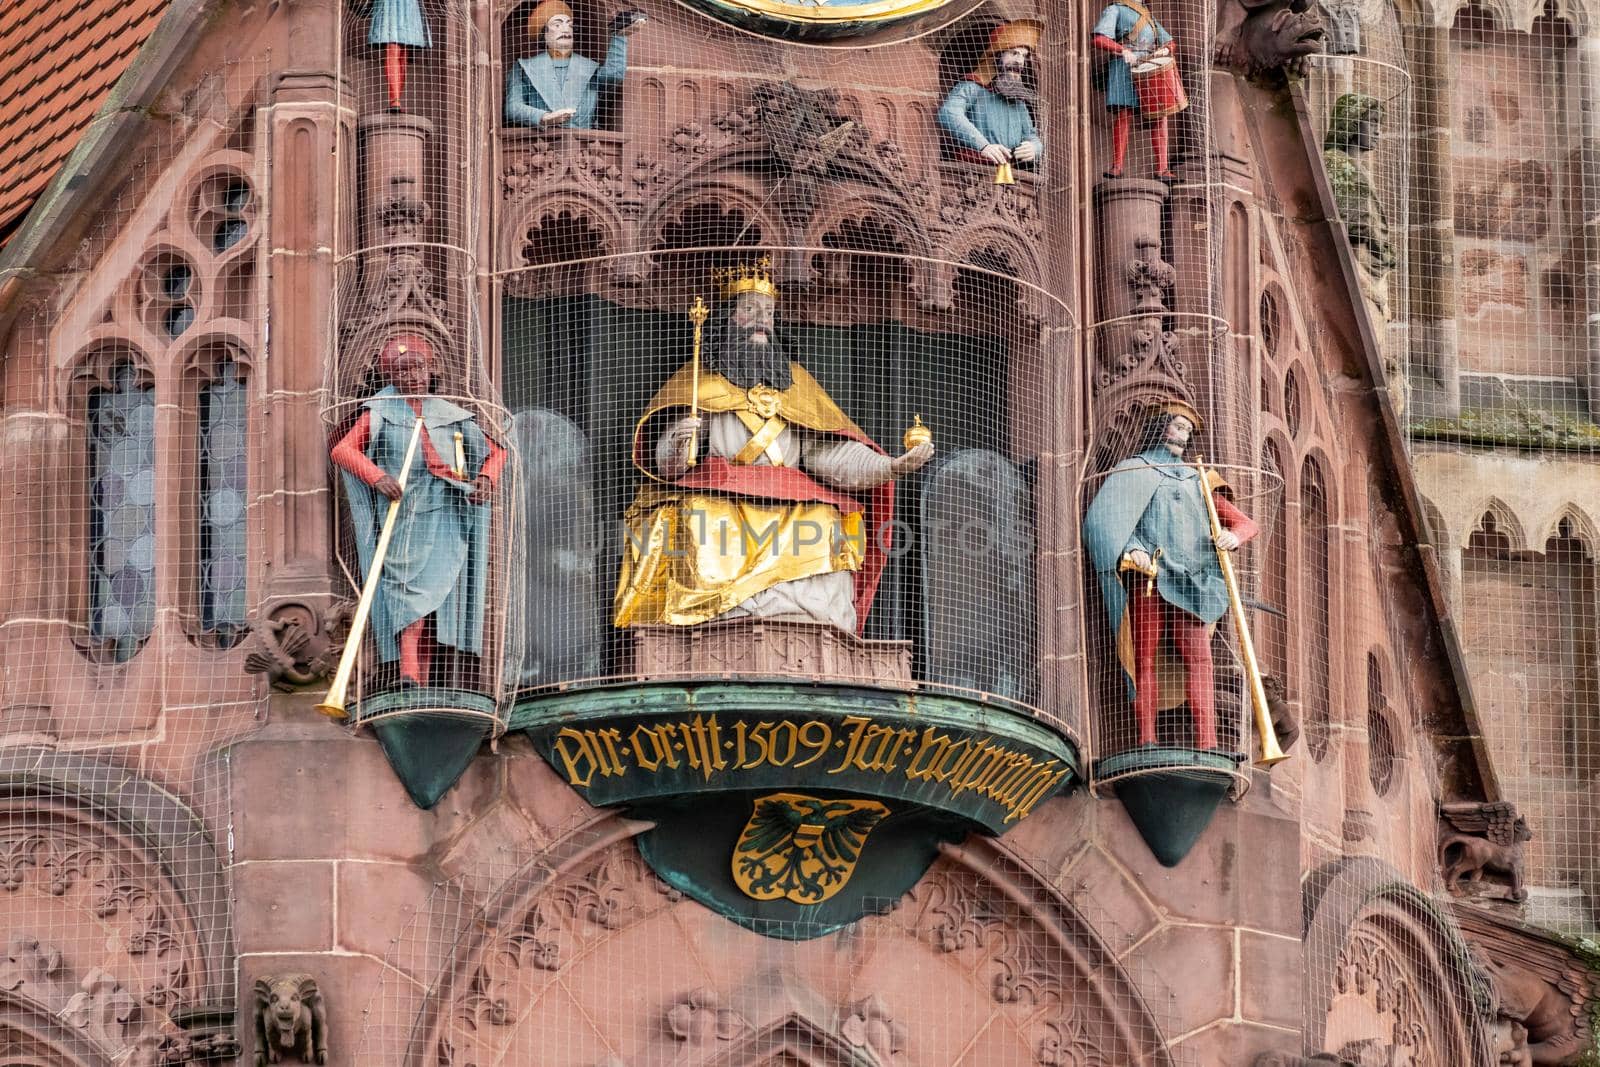 Close up of holy figures and other details from the Frauenkirche (woman church) in Nuremberg, Bavaria, Germany